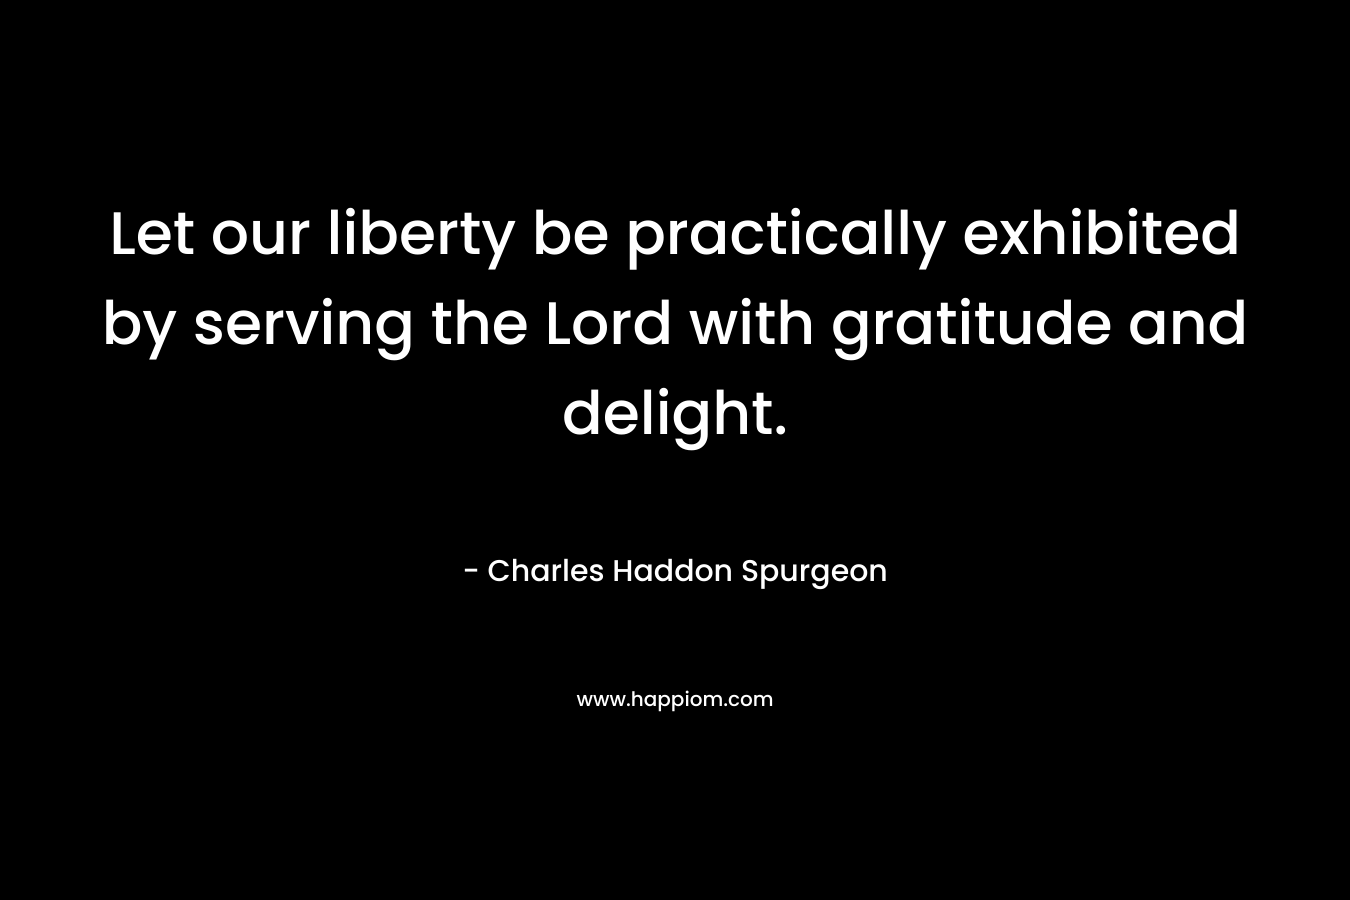 Let our liberty be practically exhibited by serving the Lord with gratitude and delight. – Charles Haddon Spurgeon